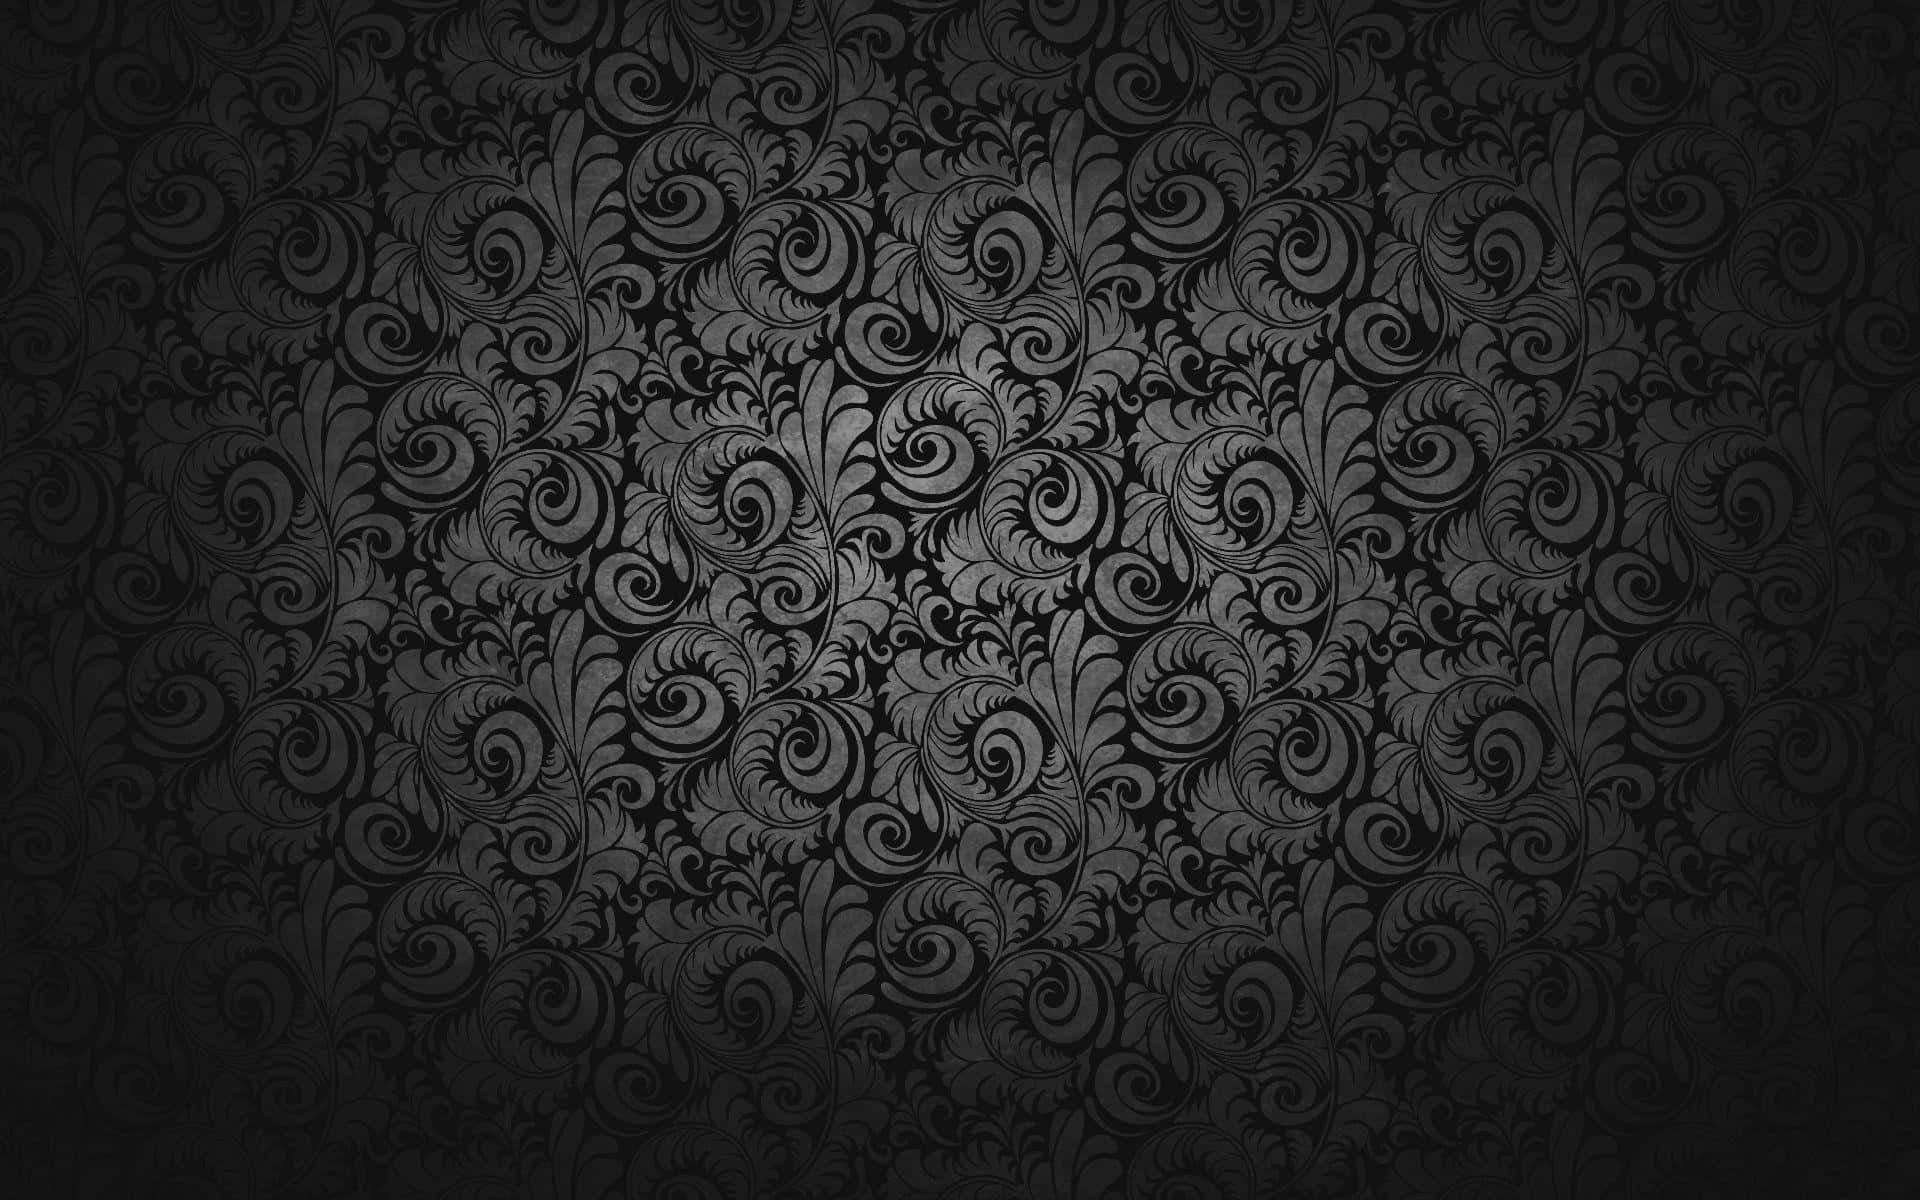 100+] Black And Grey Backgrounds